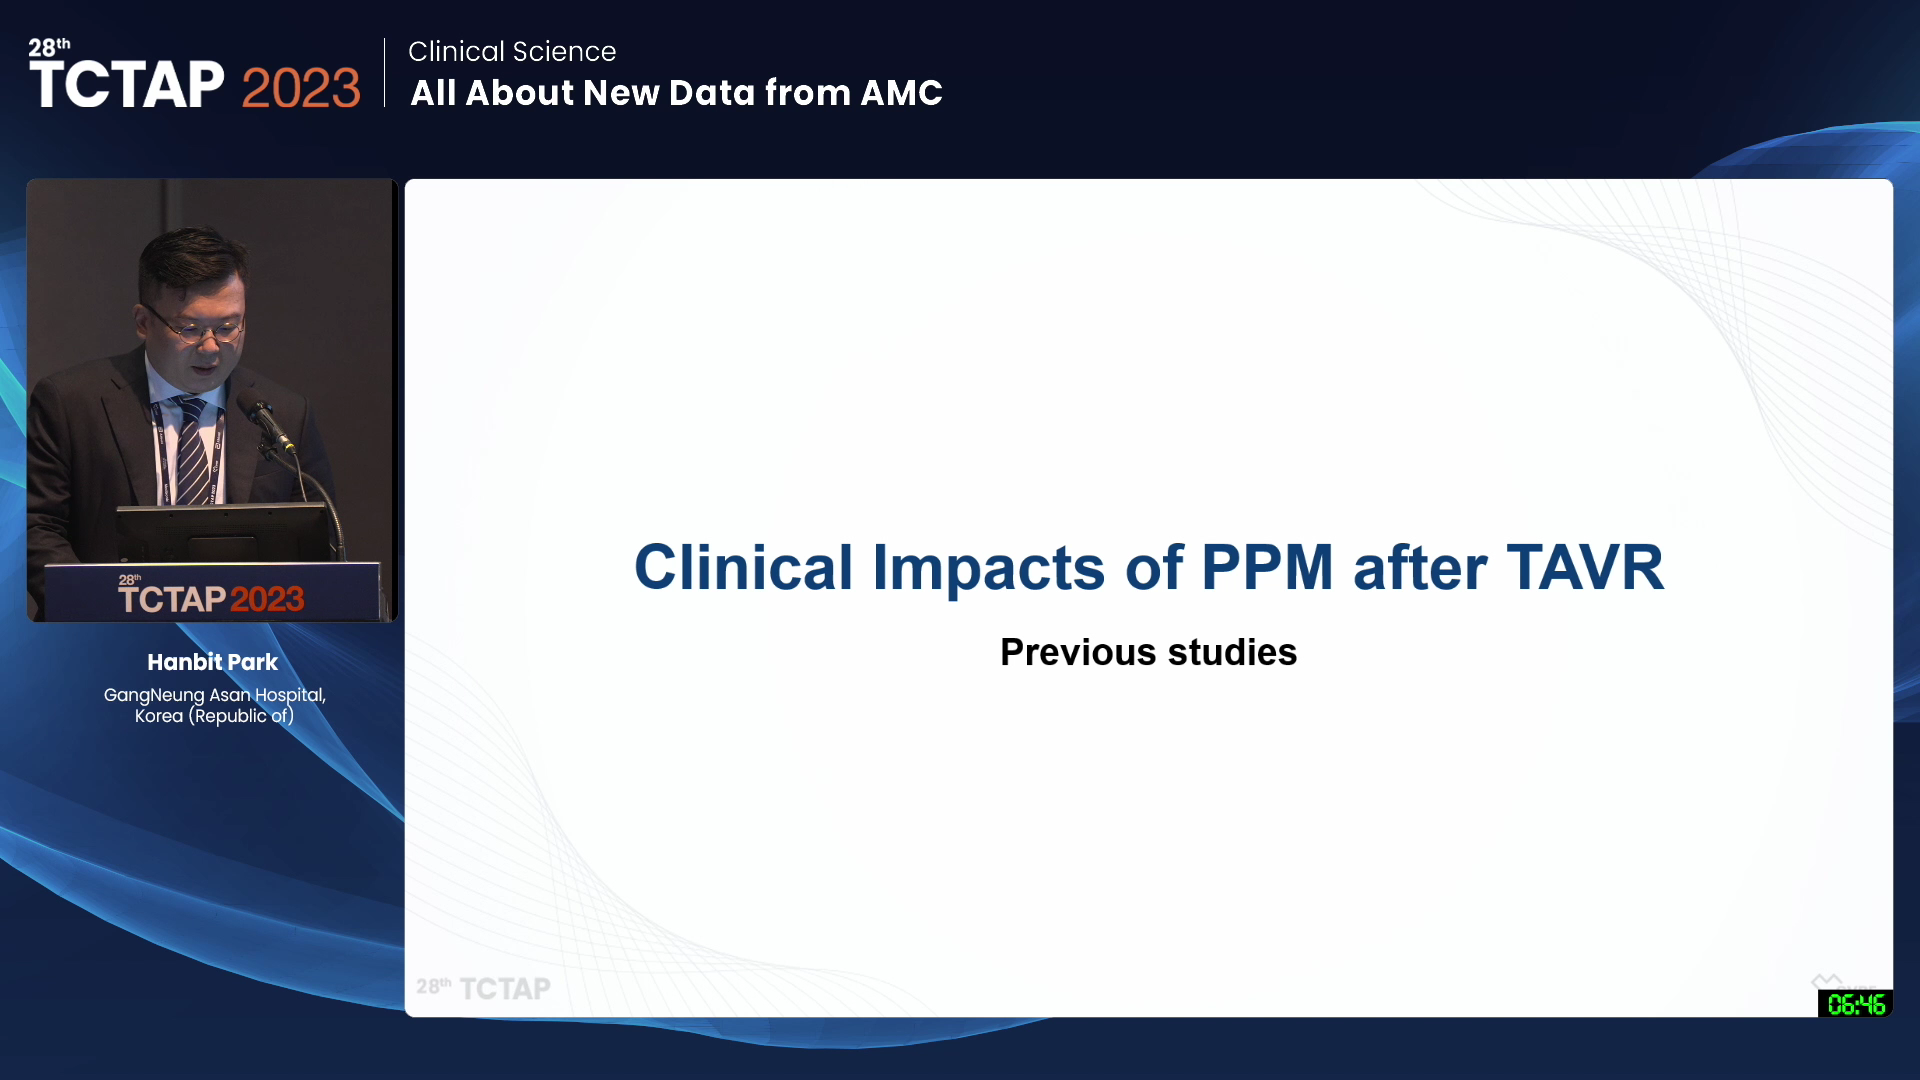 [Clinical Science] All About New Data from AMC